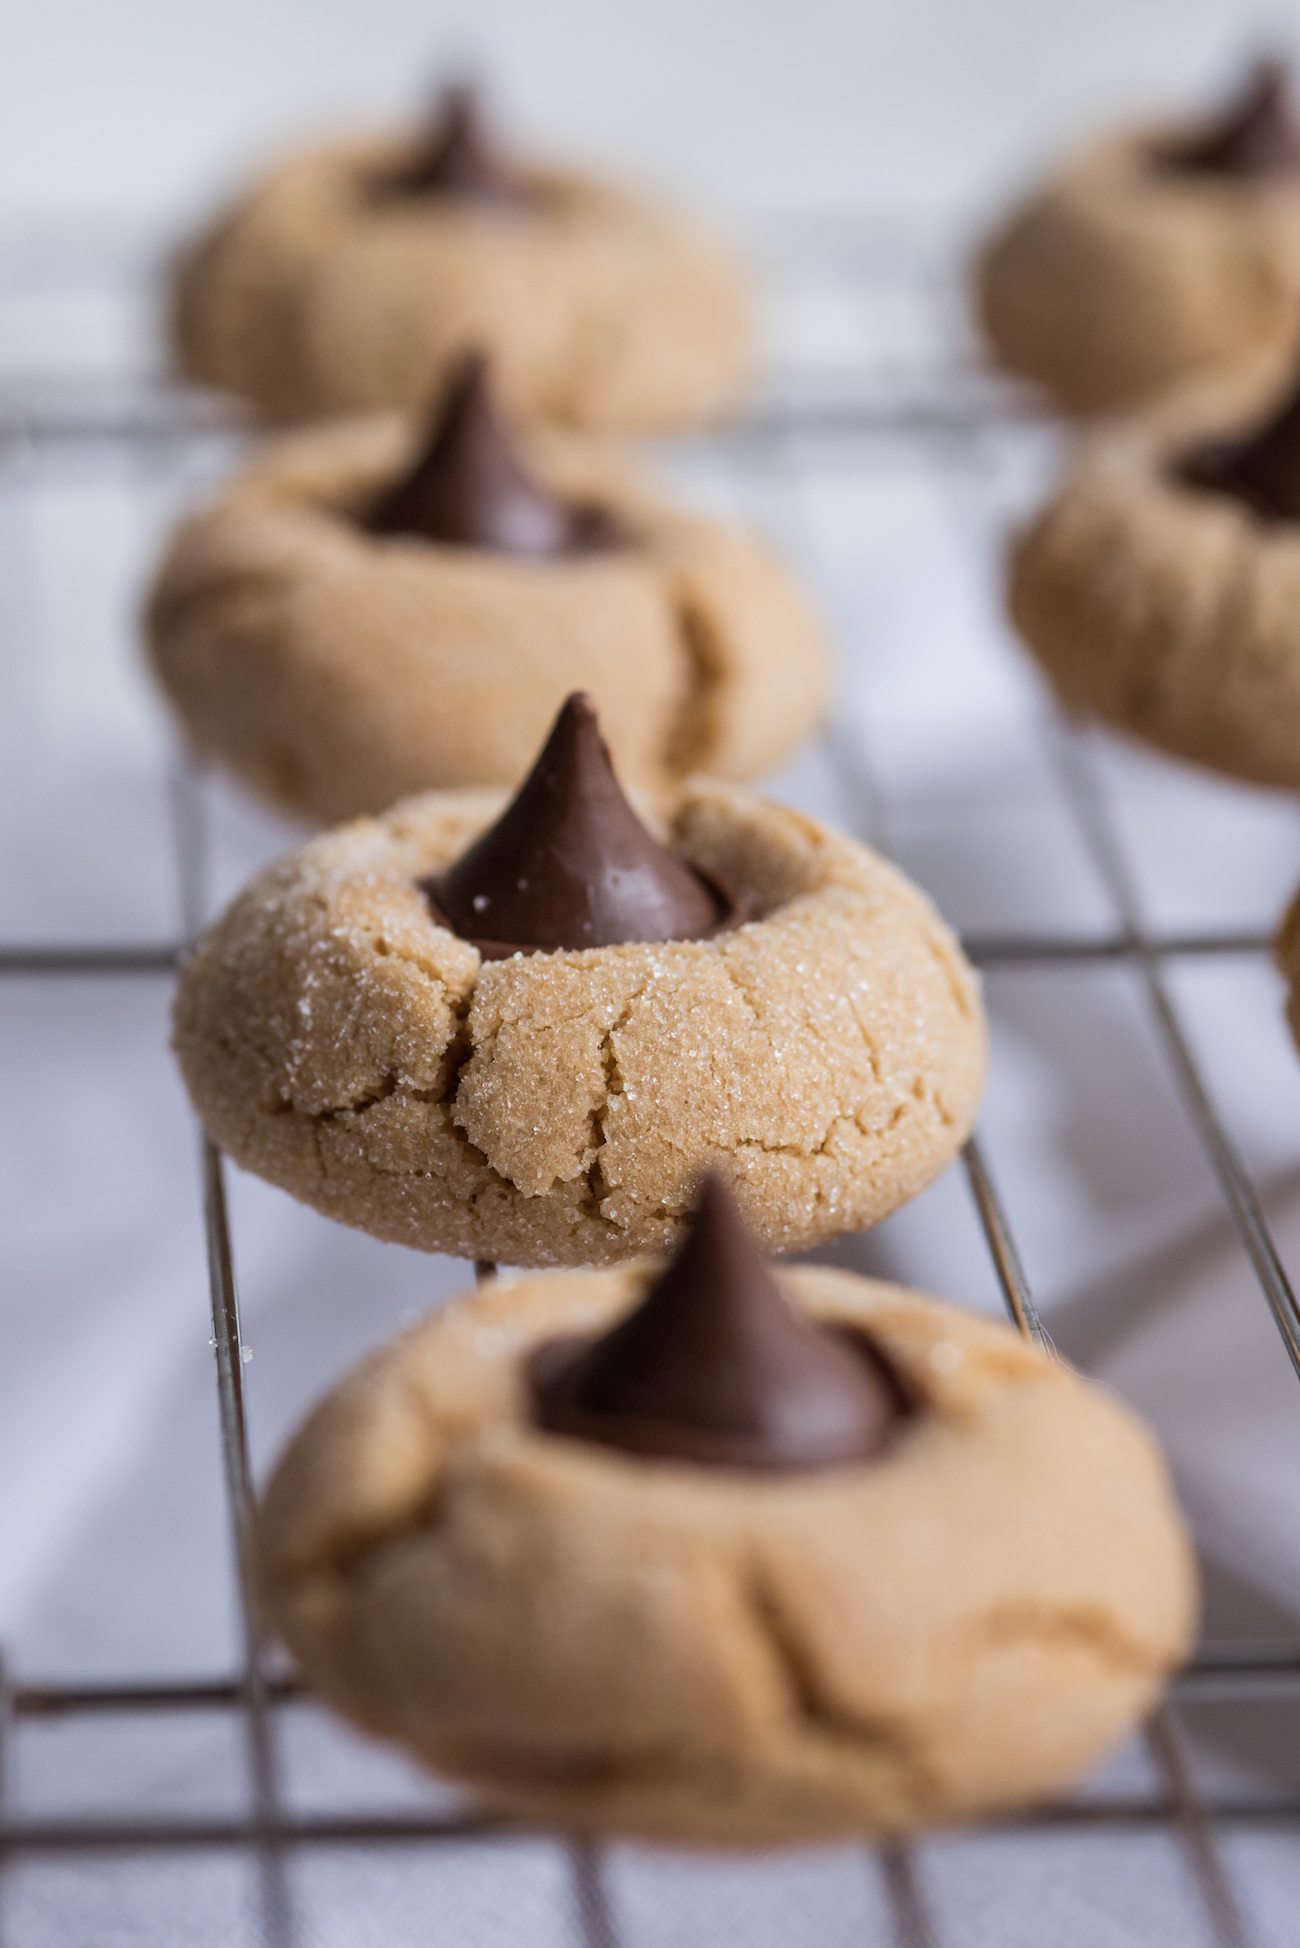 The Best Peanut Butter Blossoms Recipe | Christmas cookie recipes, Christmas cocktail recipes, entertaining tips, holiday party ideas and more from @cydconverse